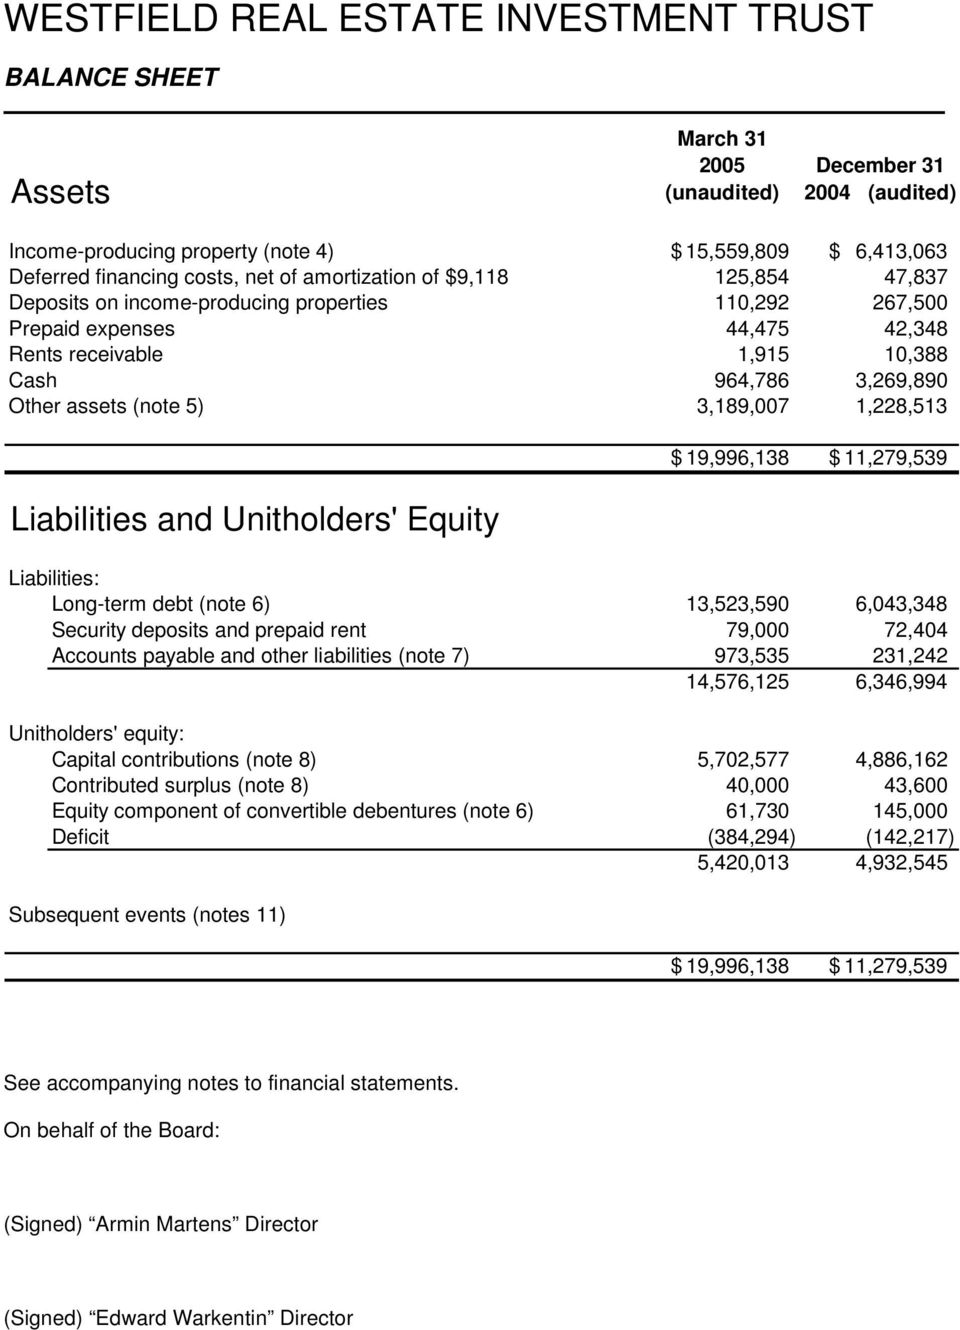 Liabilities and Unitholders' Equity $ 19,996,138 $ 11,279,539 Liabilities: Long-term debt (note 6) 13,523,590 6,043,348 Security deposits and prepaid rent 79,000 72,404 Accounts payable and other